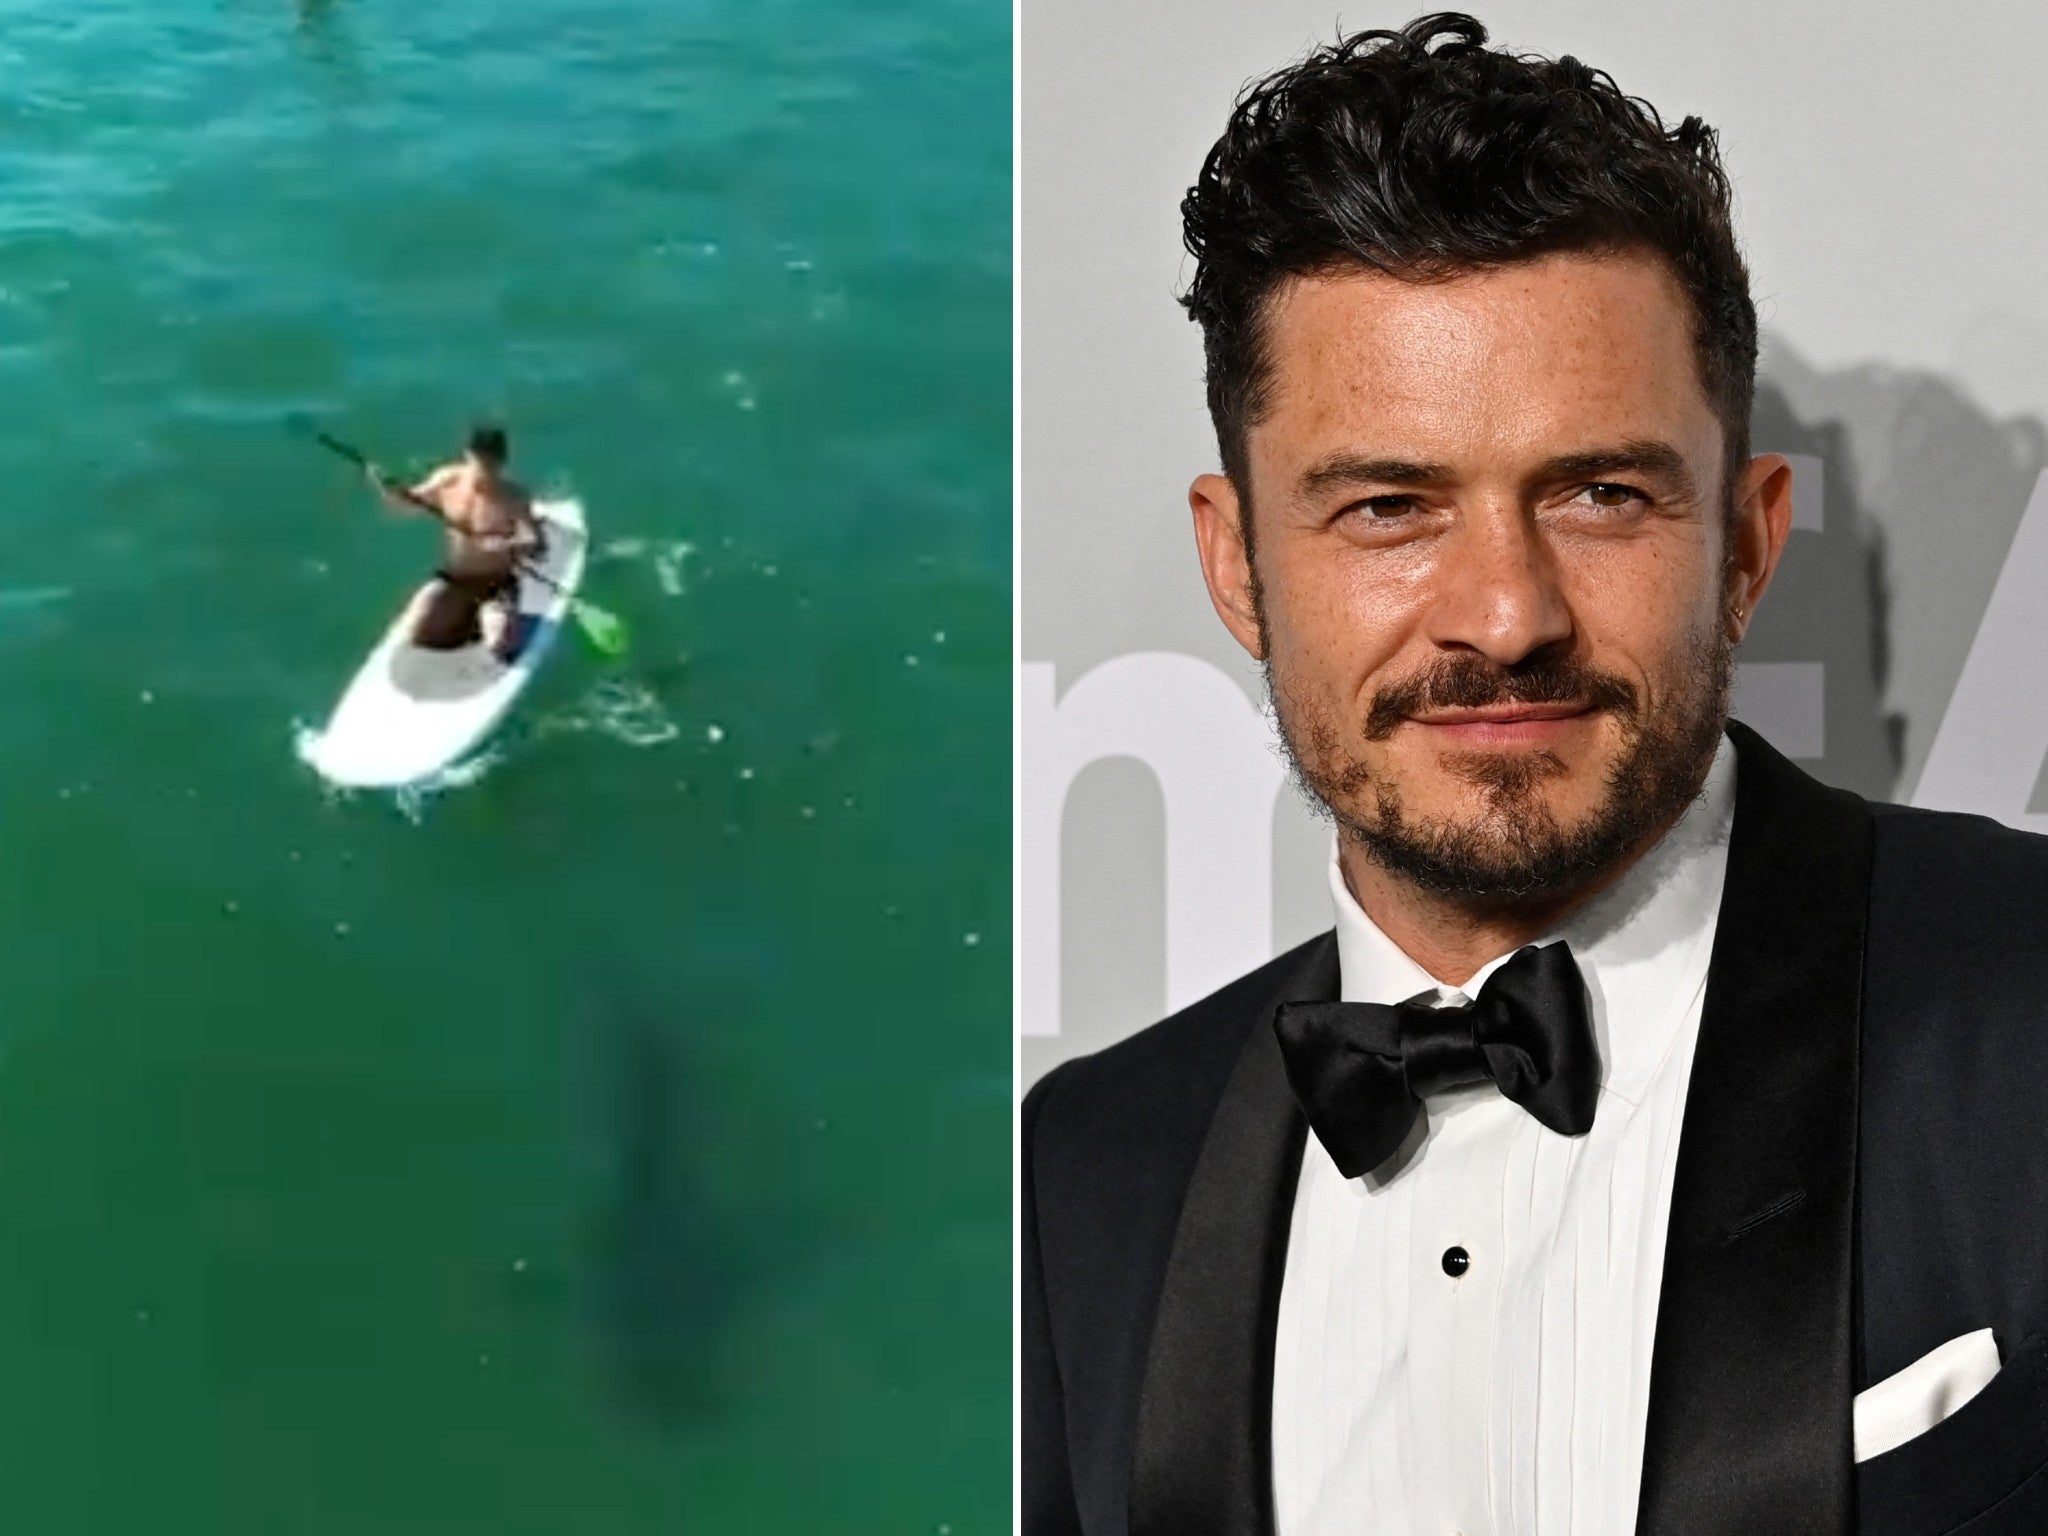 Orlando Bloom shared a video with the shark